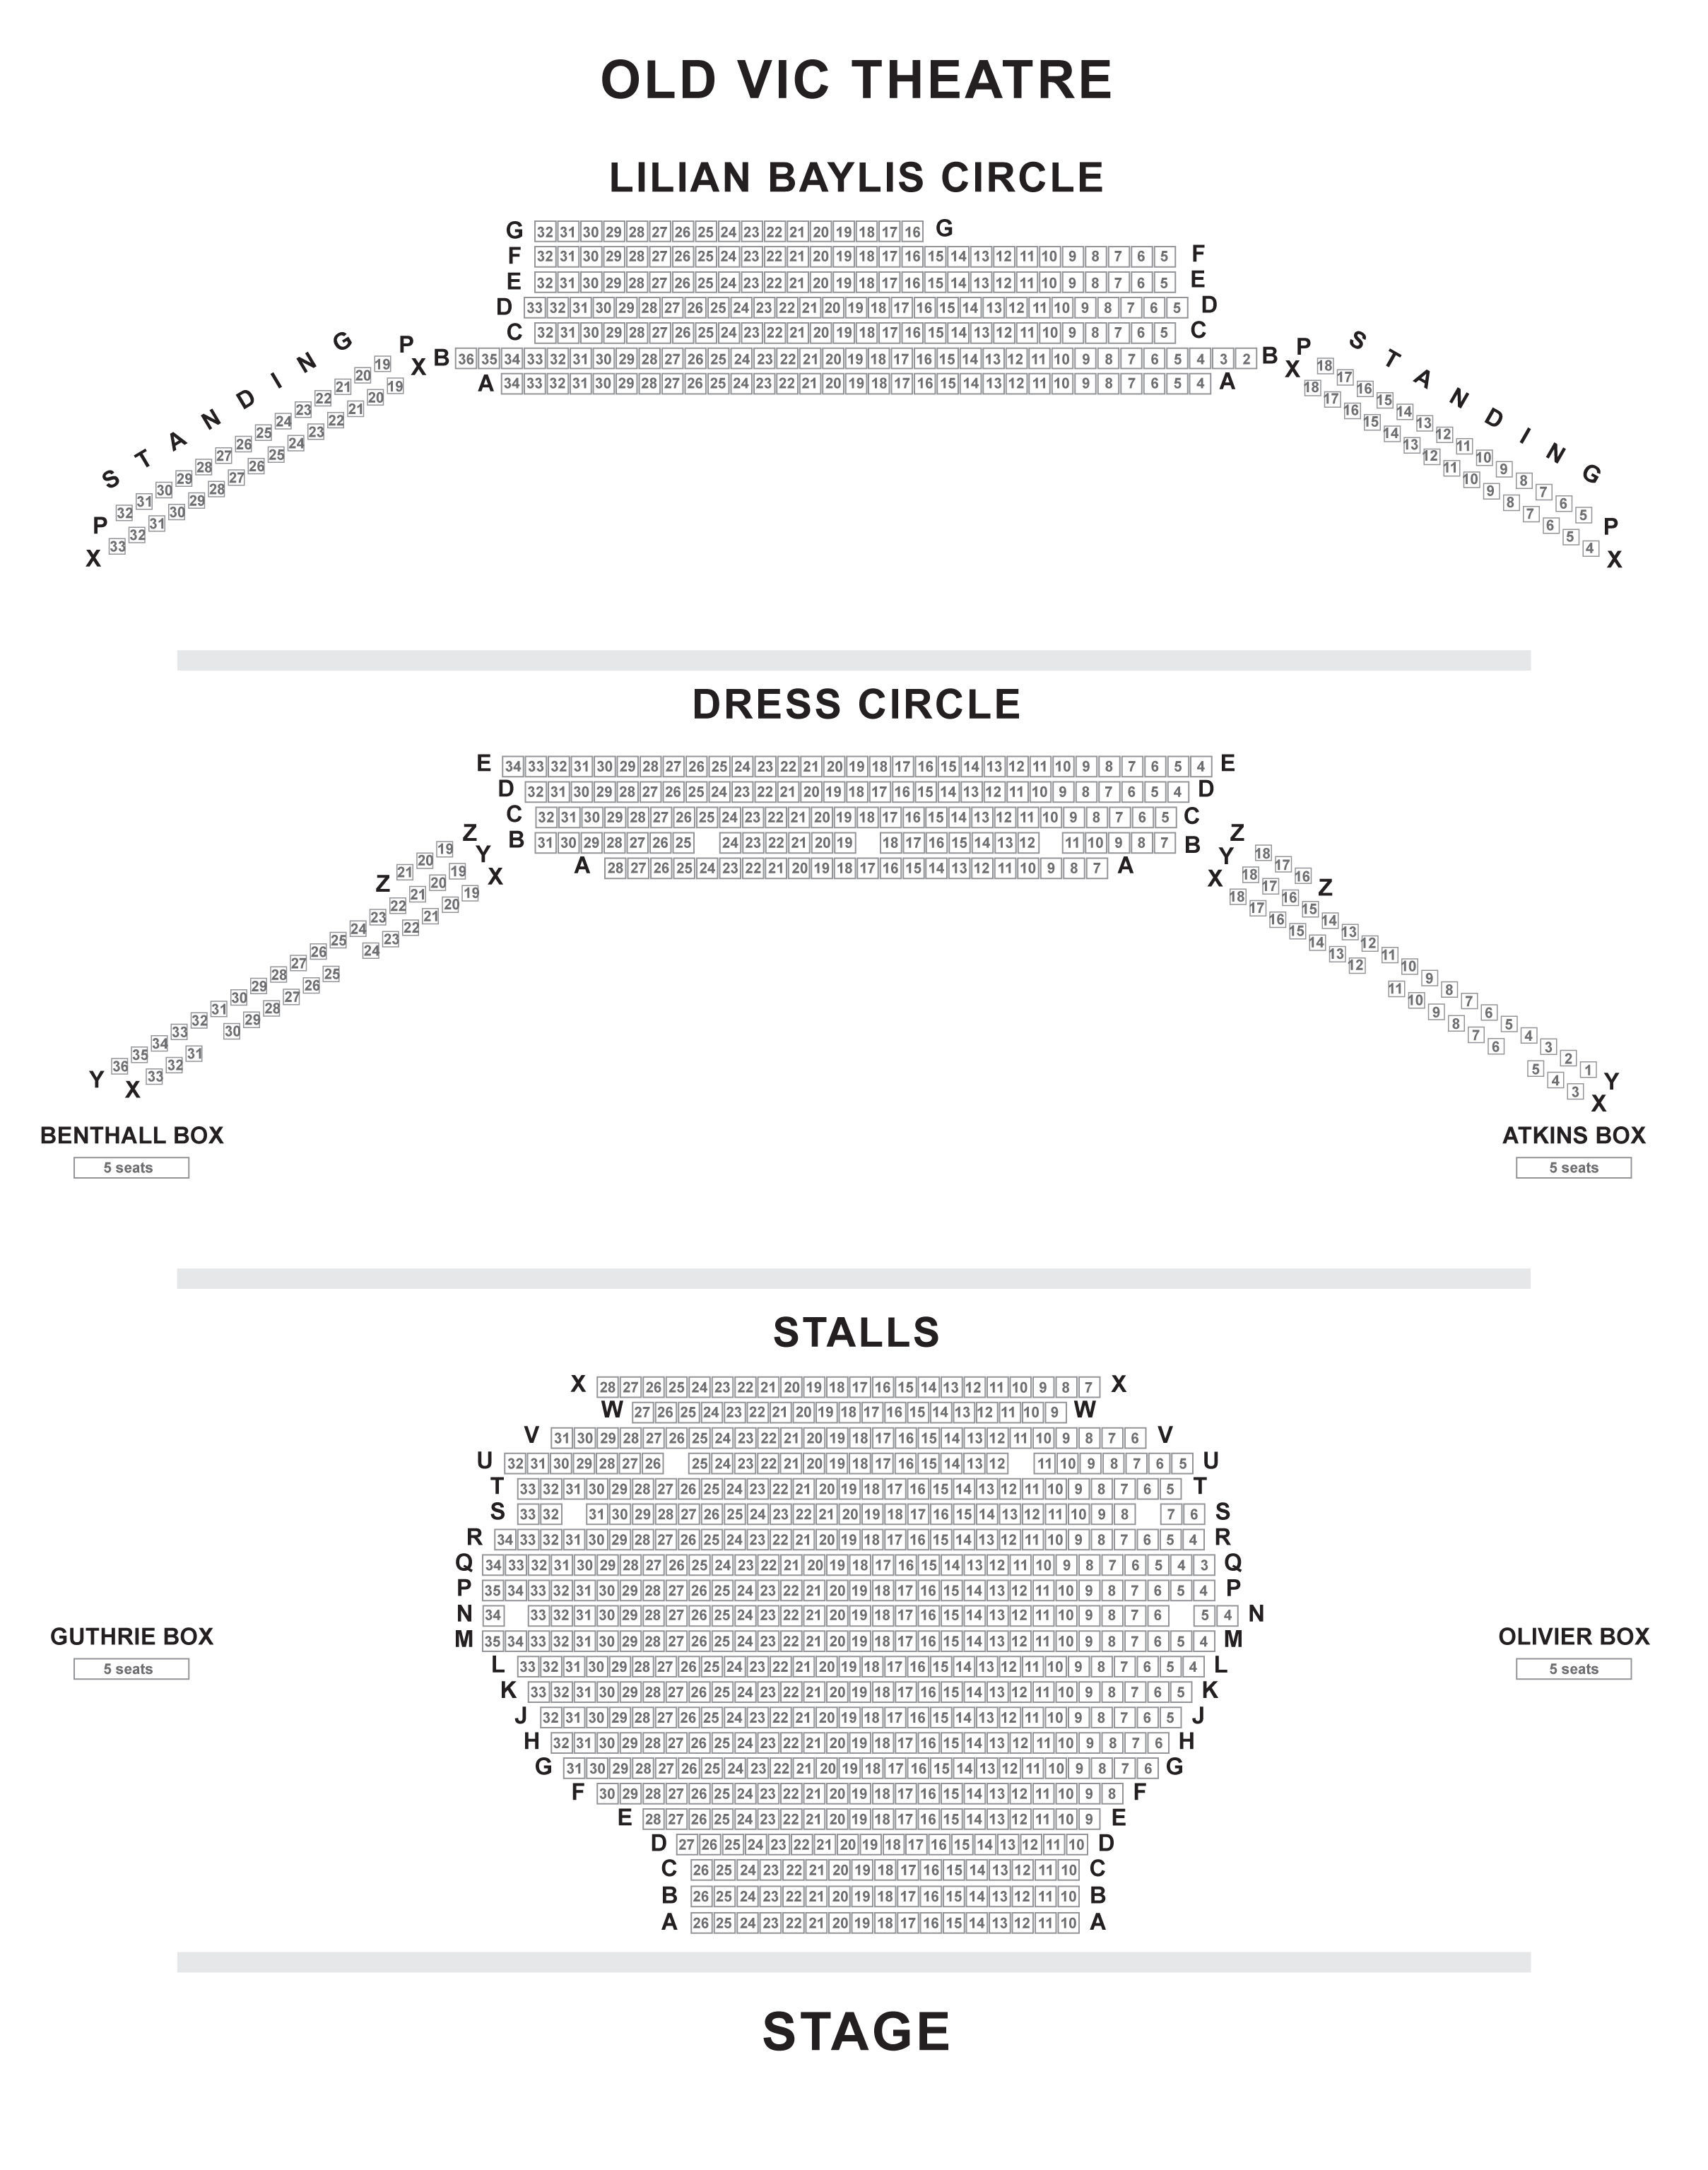 Old Vic Theatre seating plan